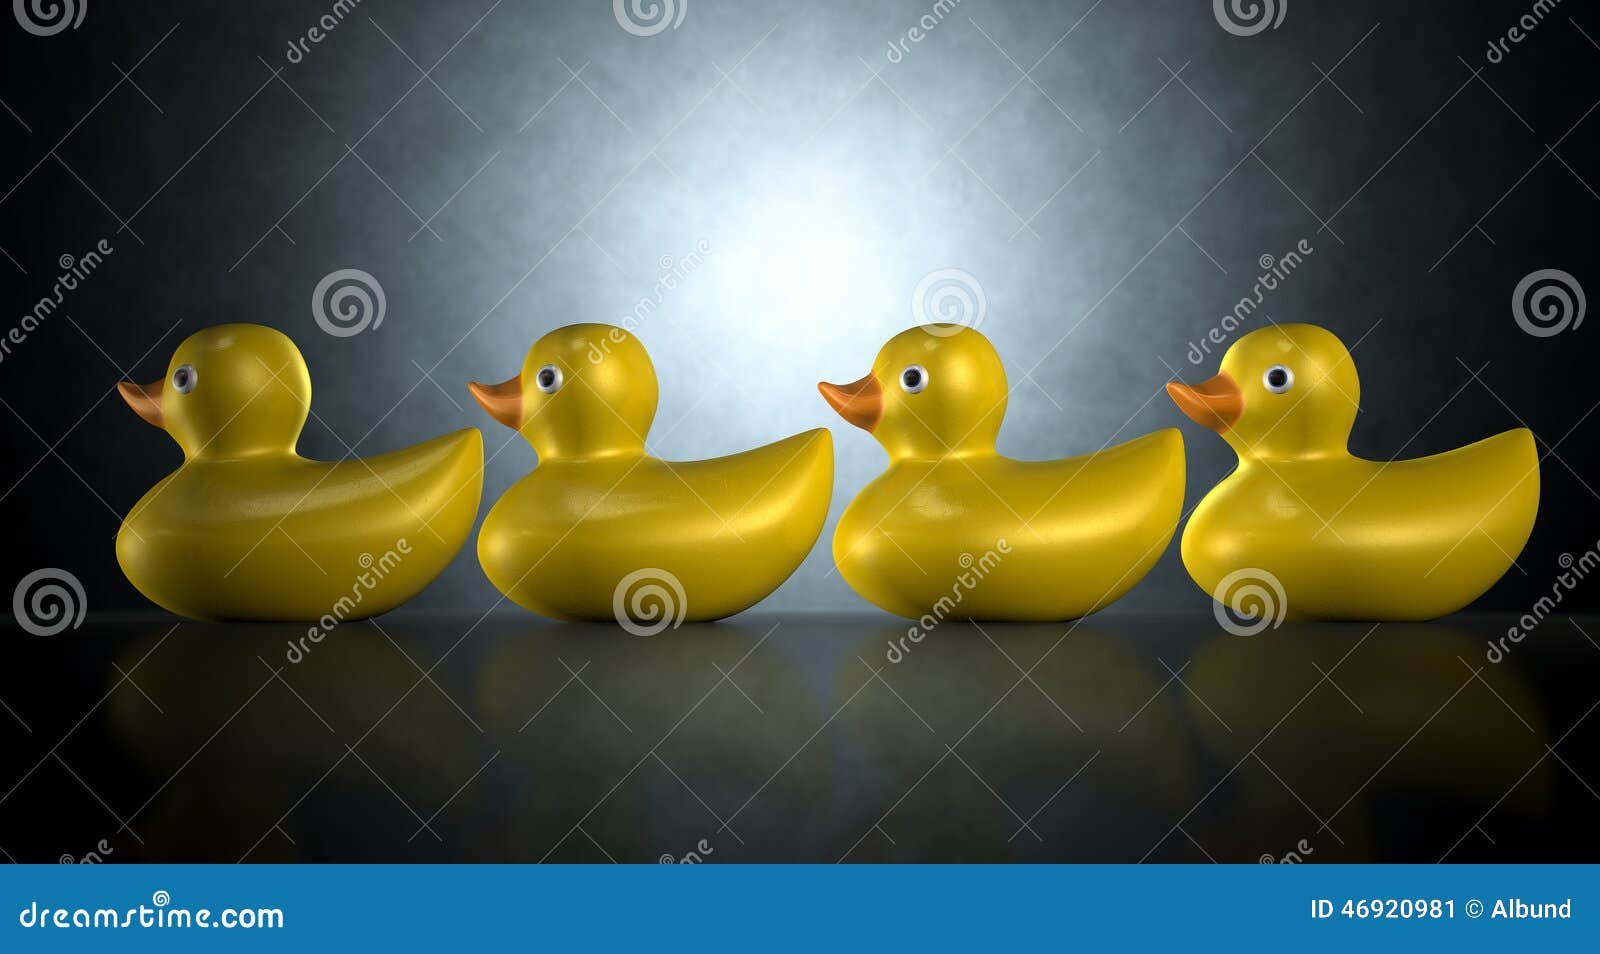 get your ducks in a row